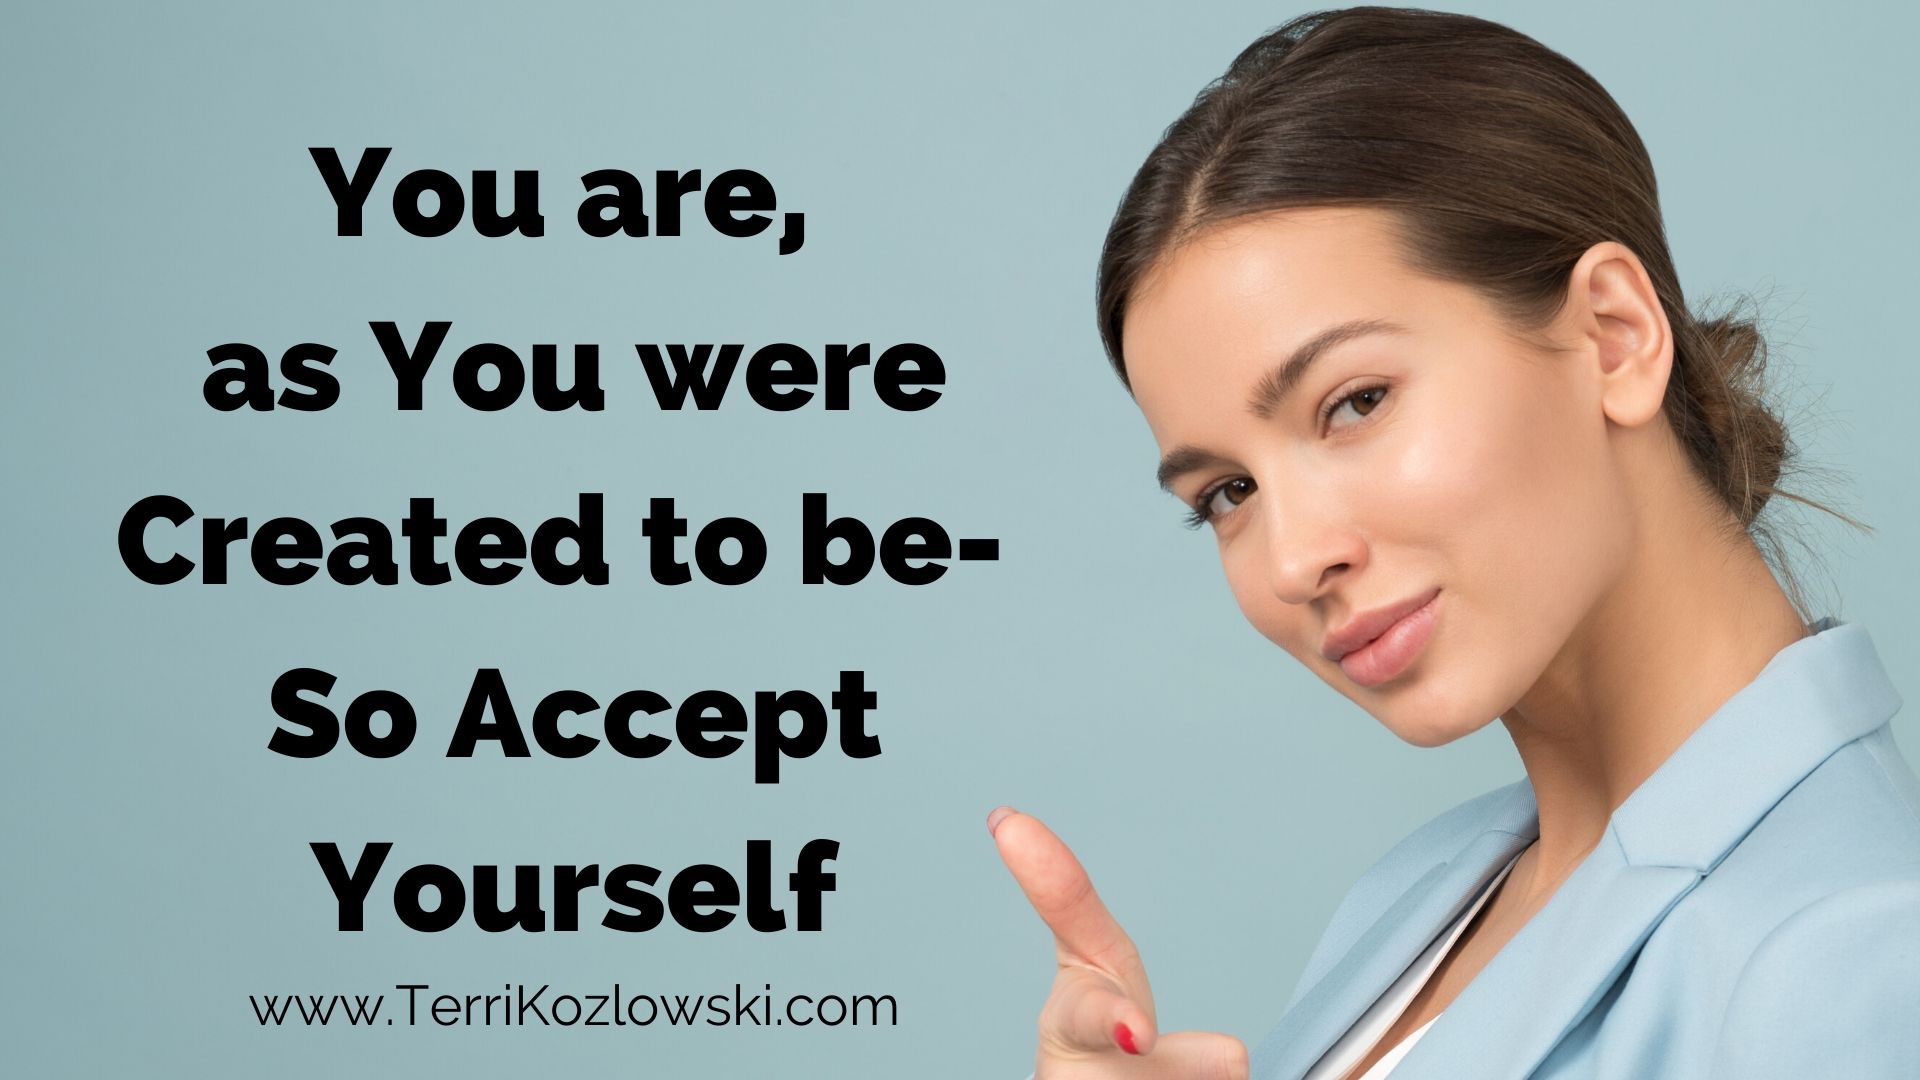 You are, as You were Created to be- so Accept Yourself